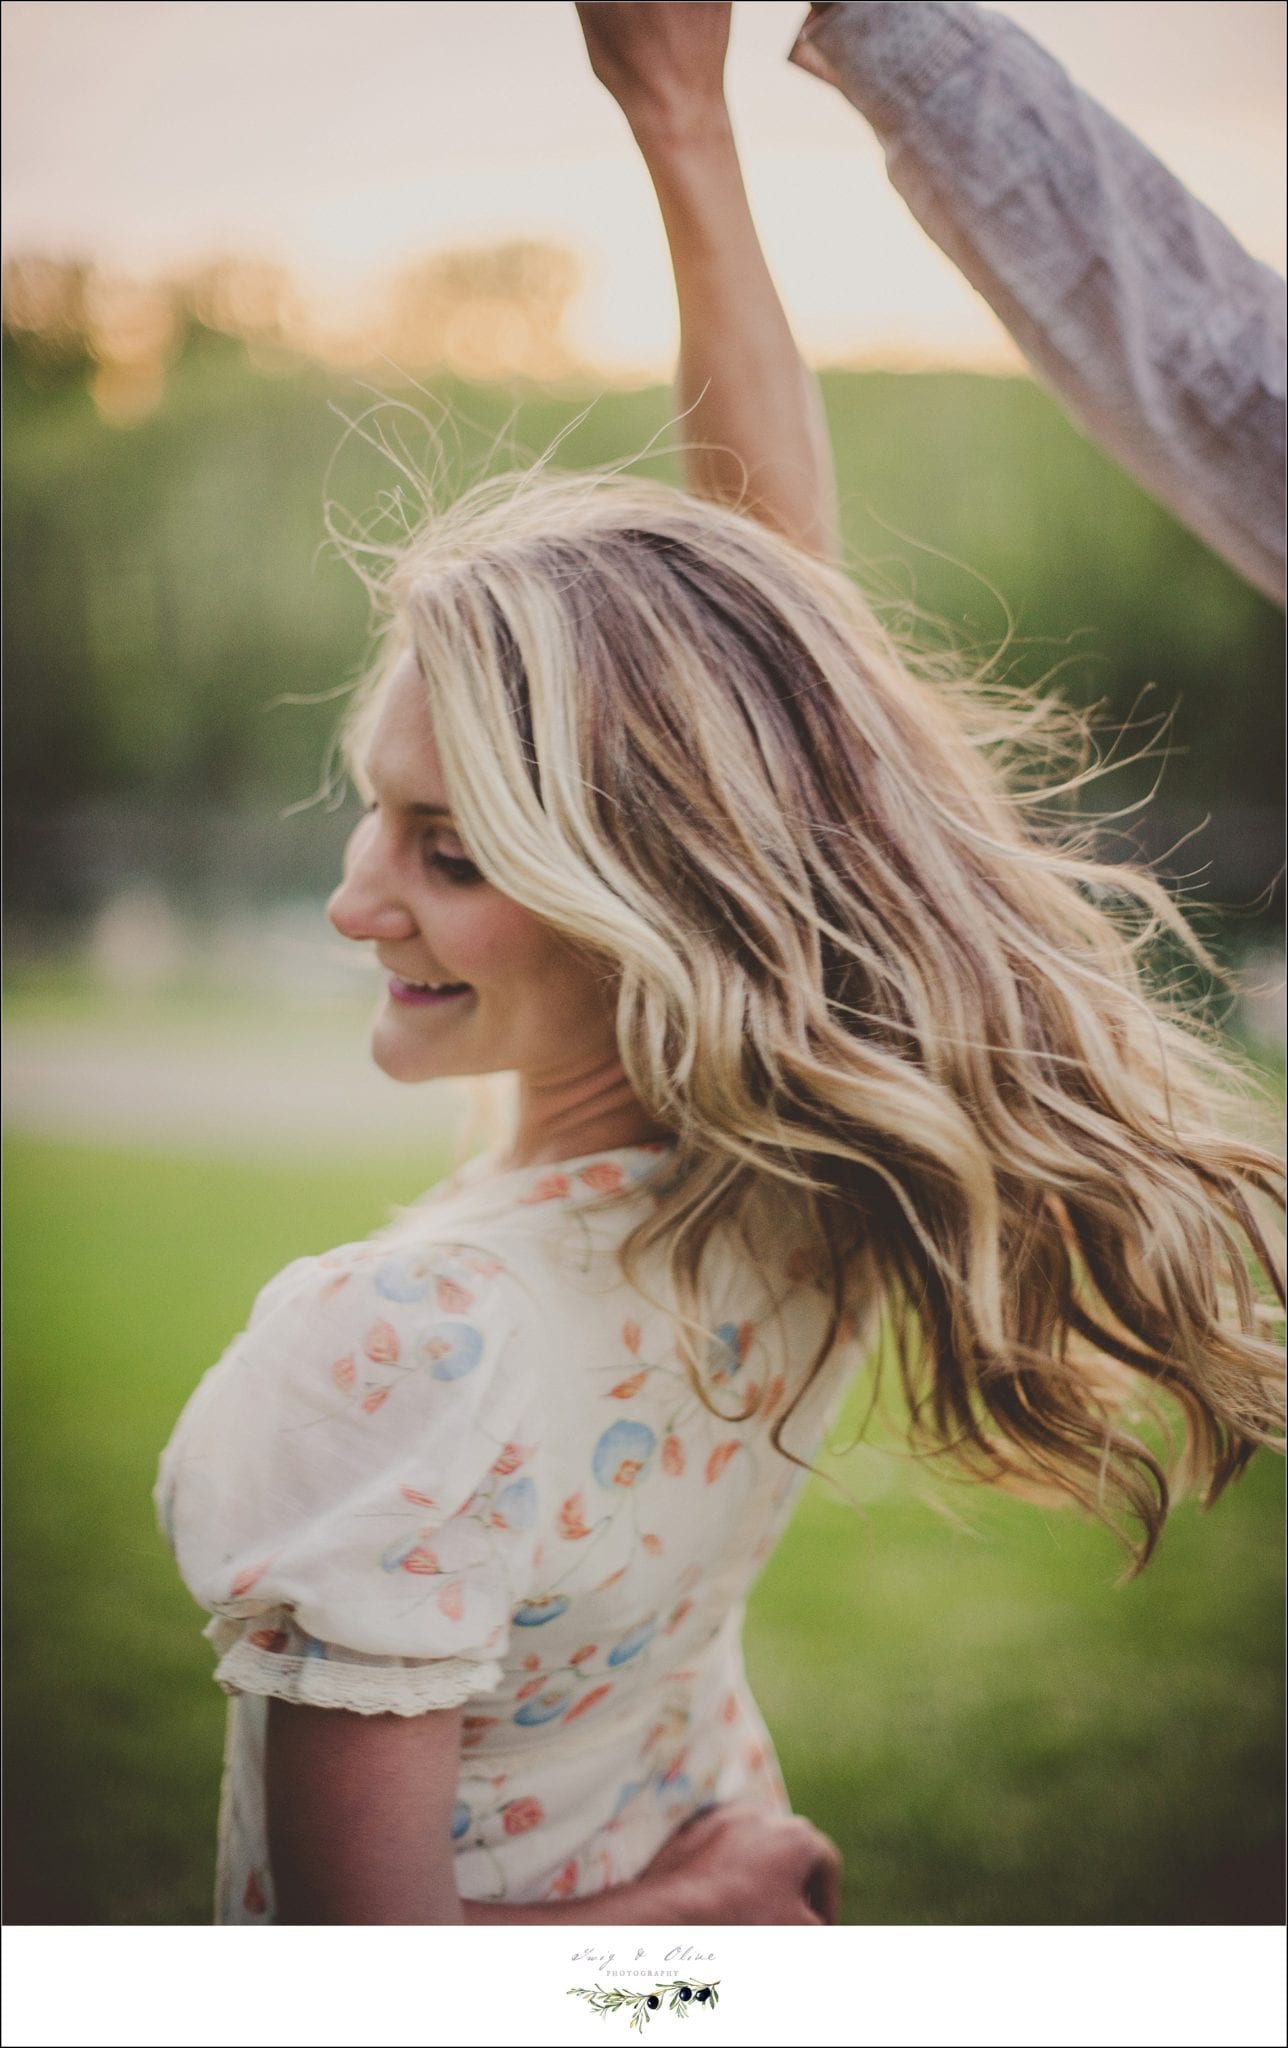 bouncy hair, summer dresses, stylized shoots, outdoor rustic, vintage, smiles, love, cherish, Twig and Olive